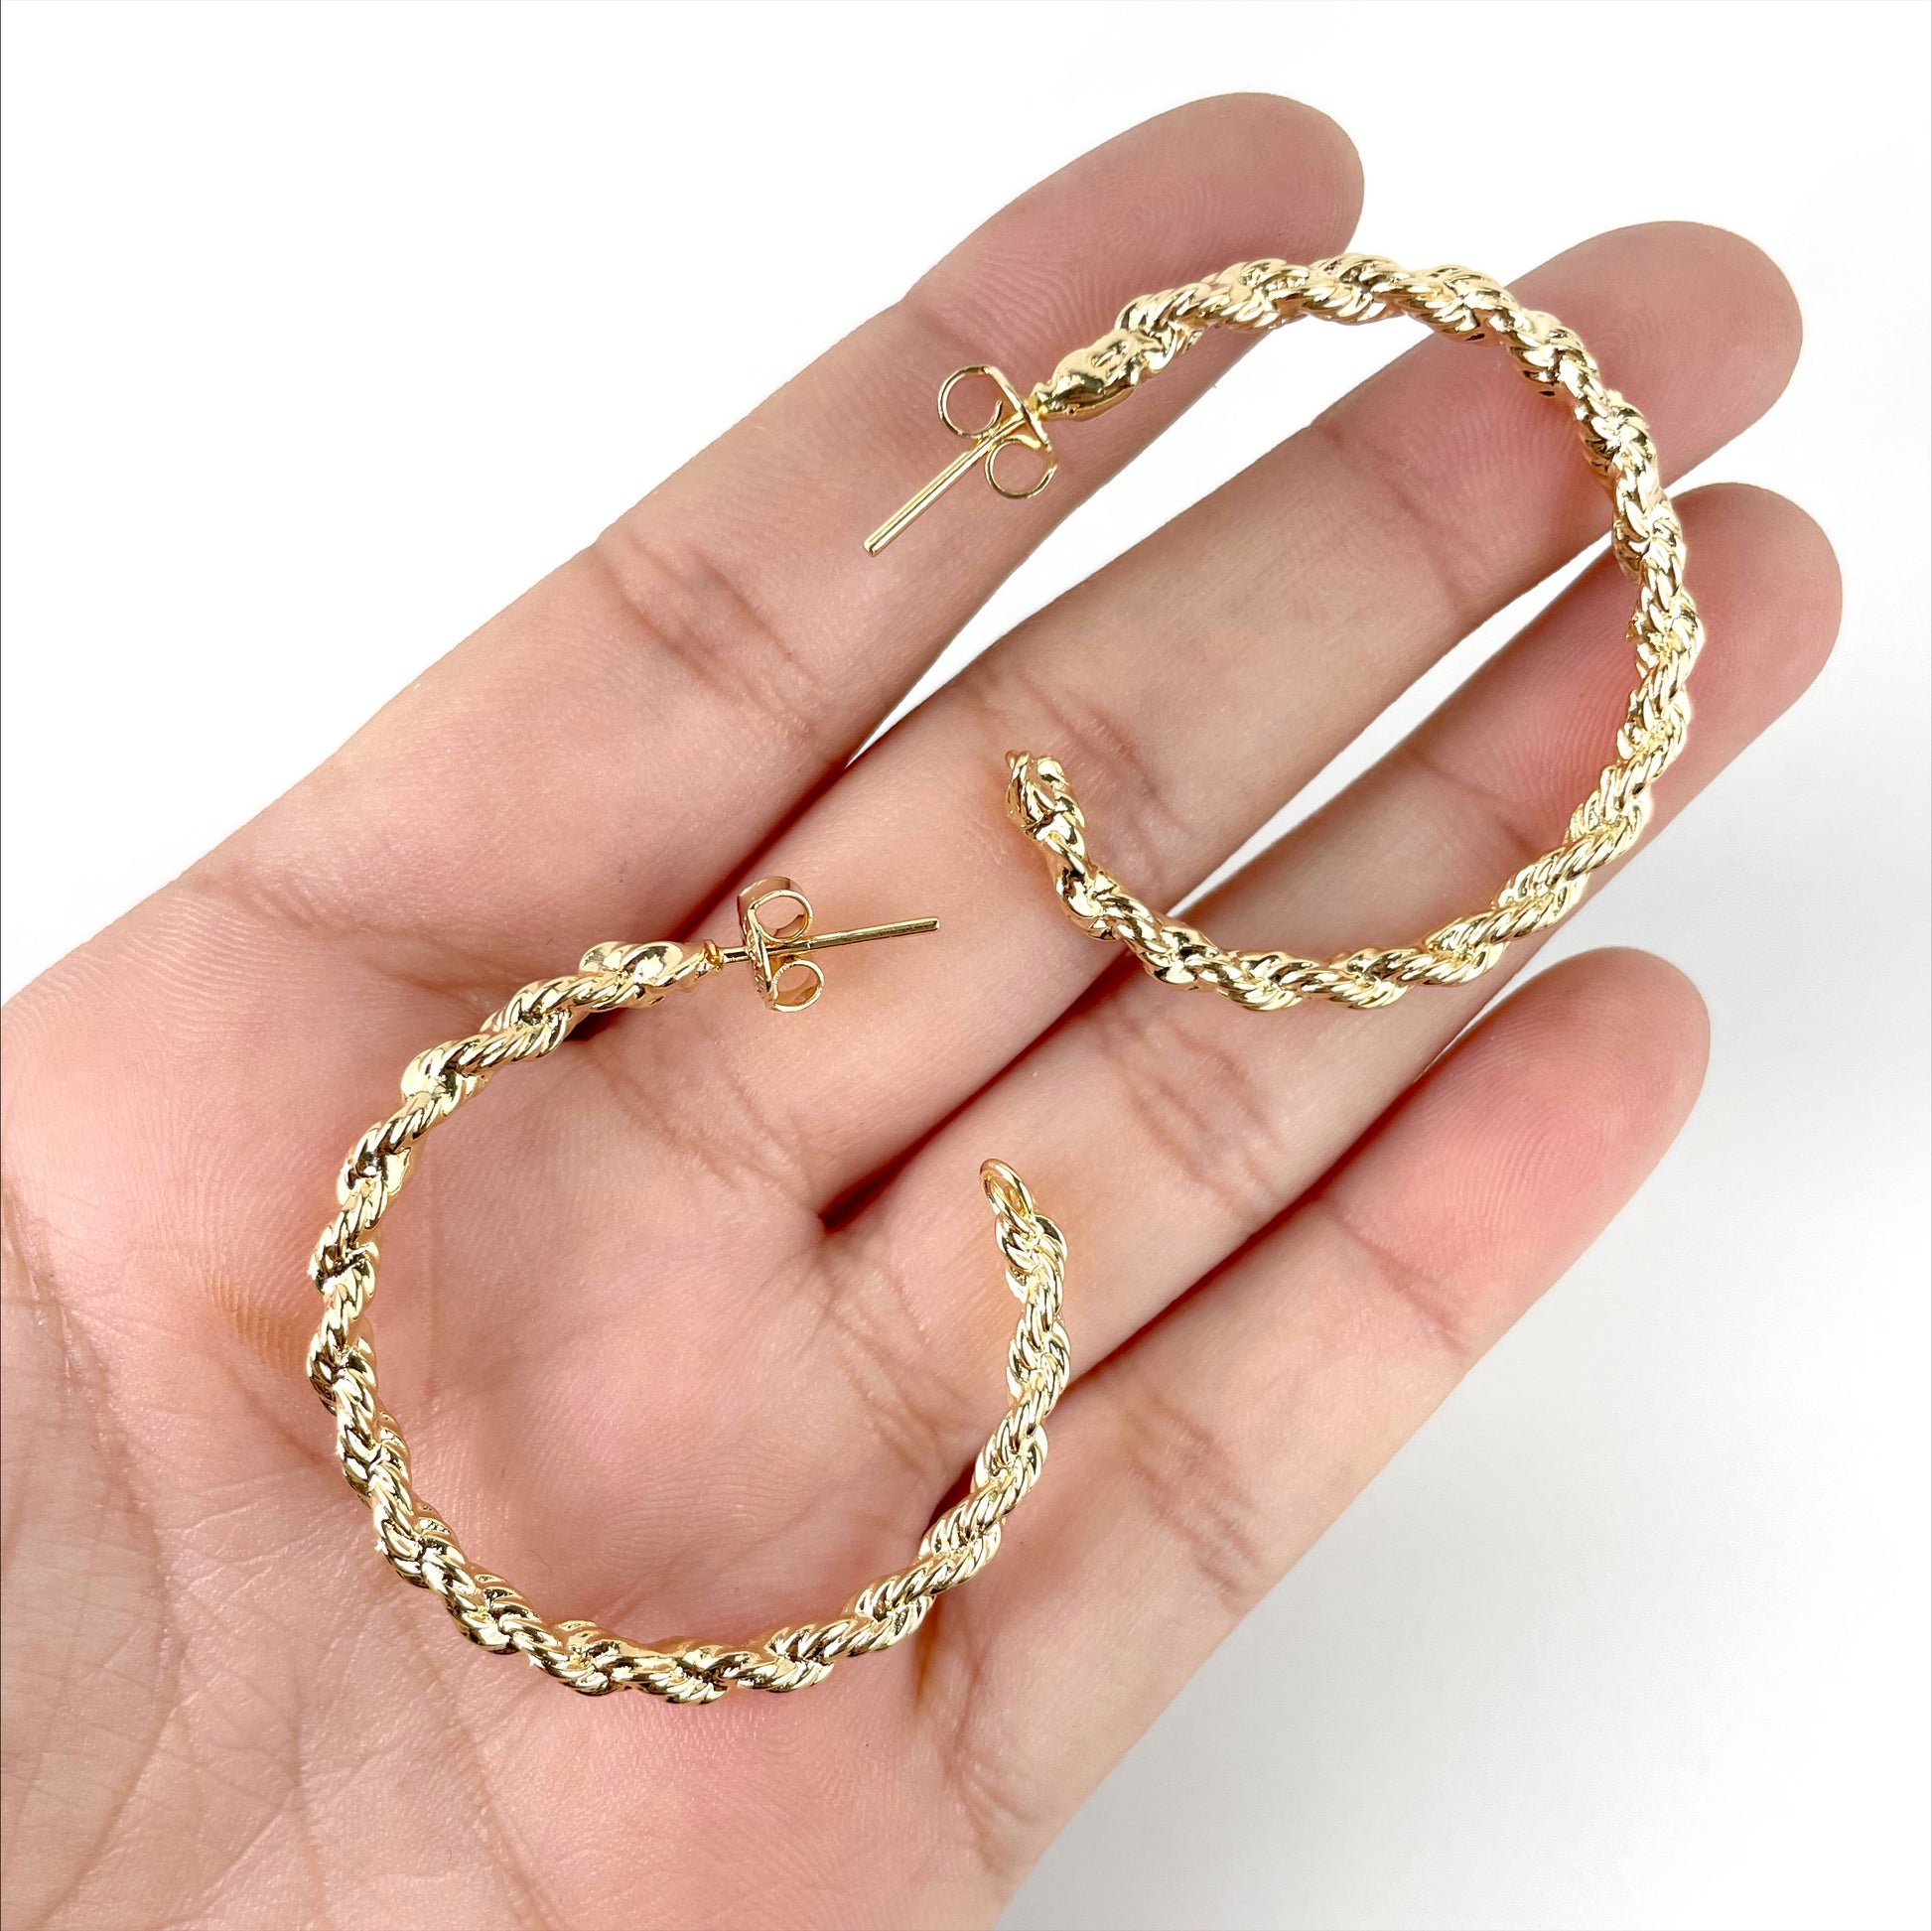 18k Gold Filled Small 35mm, C-Hoop, Push Back Closure, Wholesale Jewelry Supplies